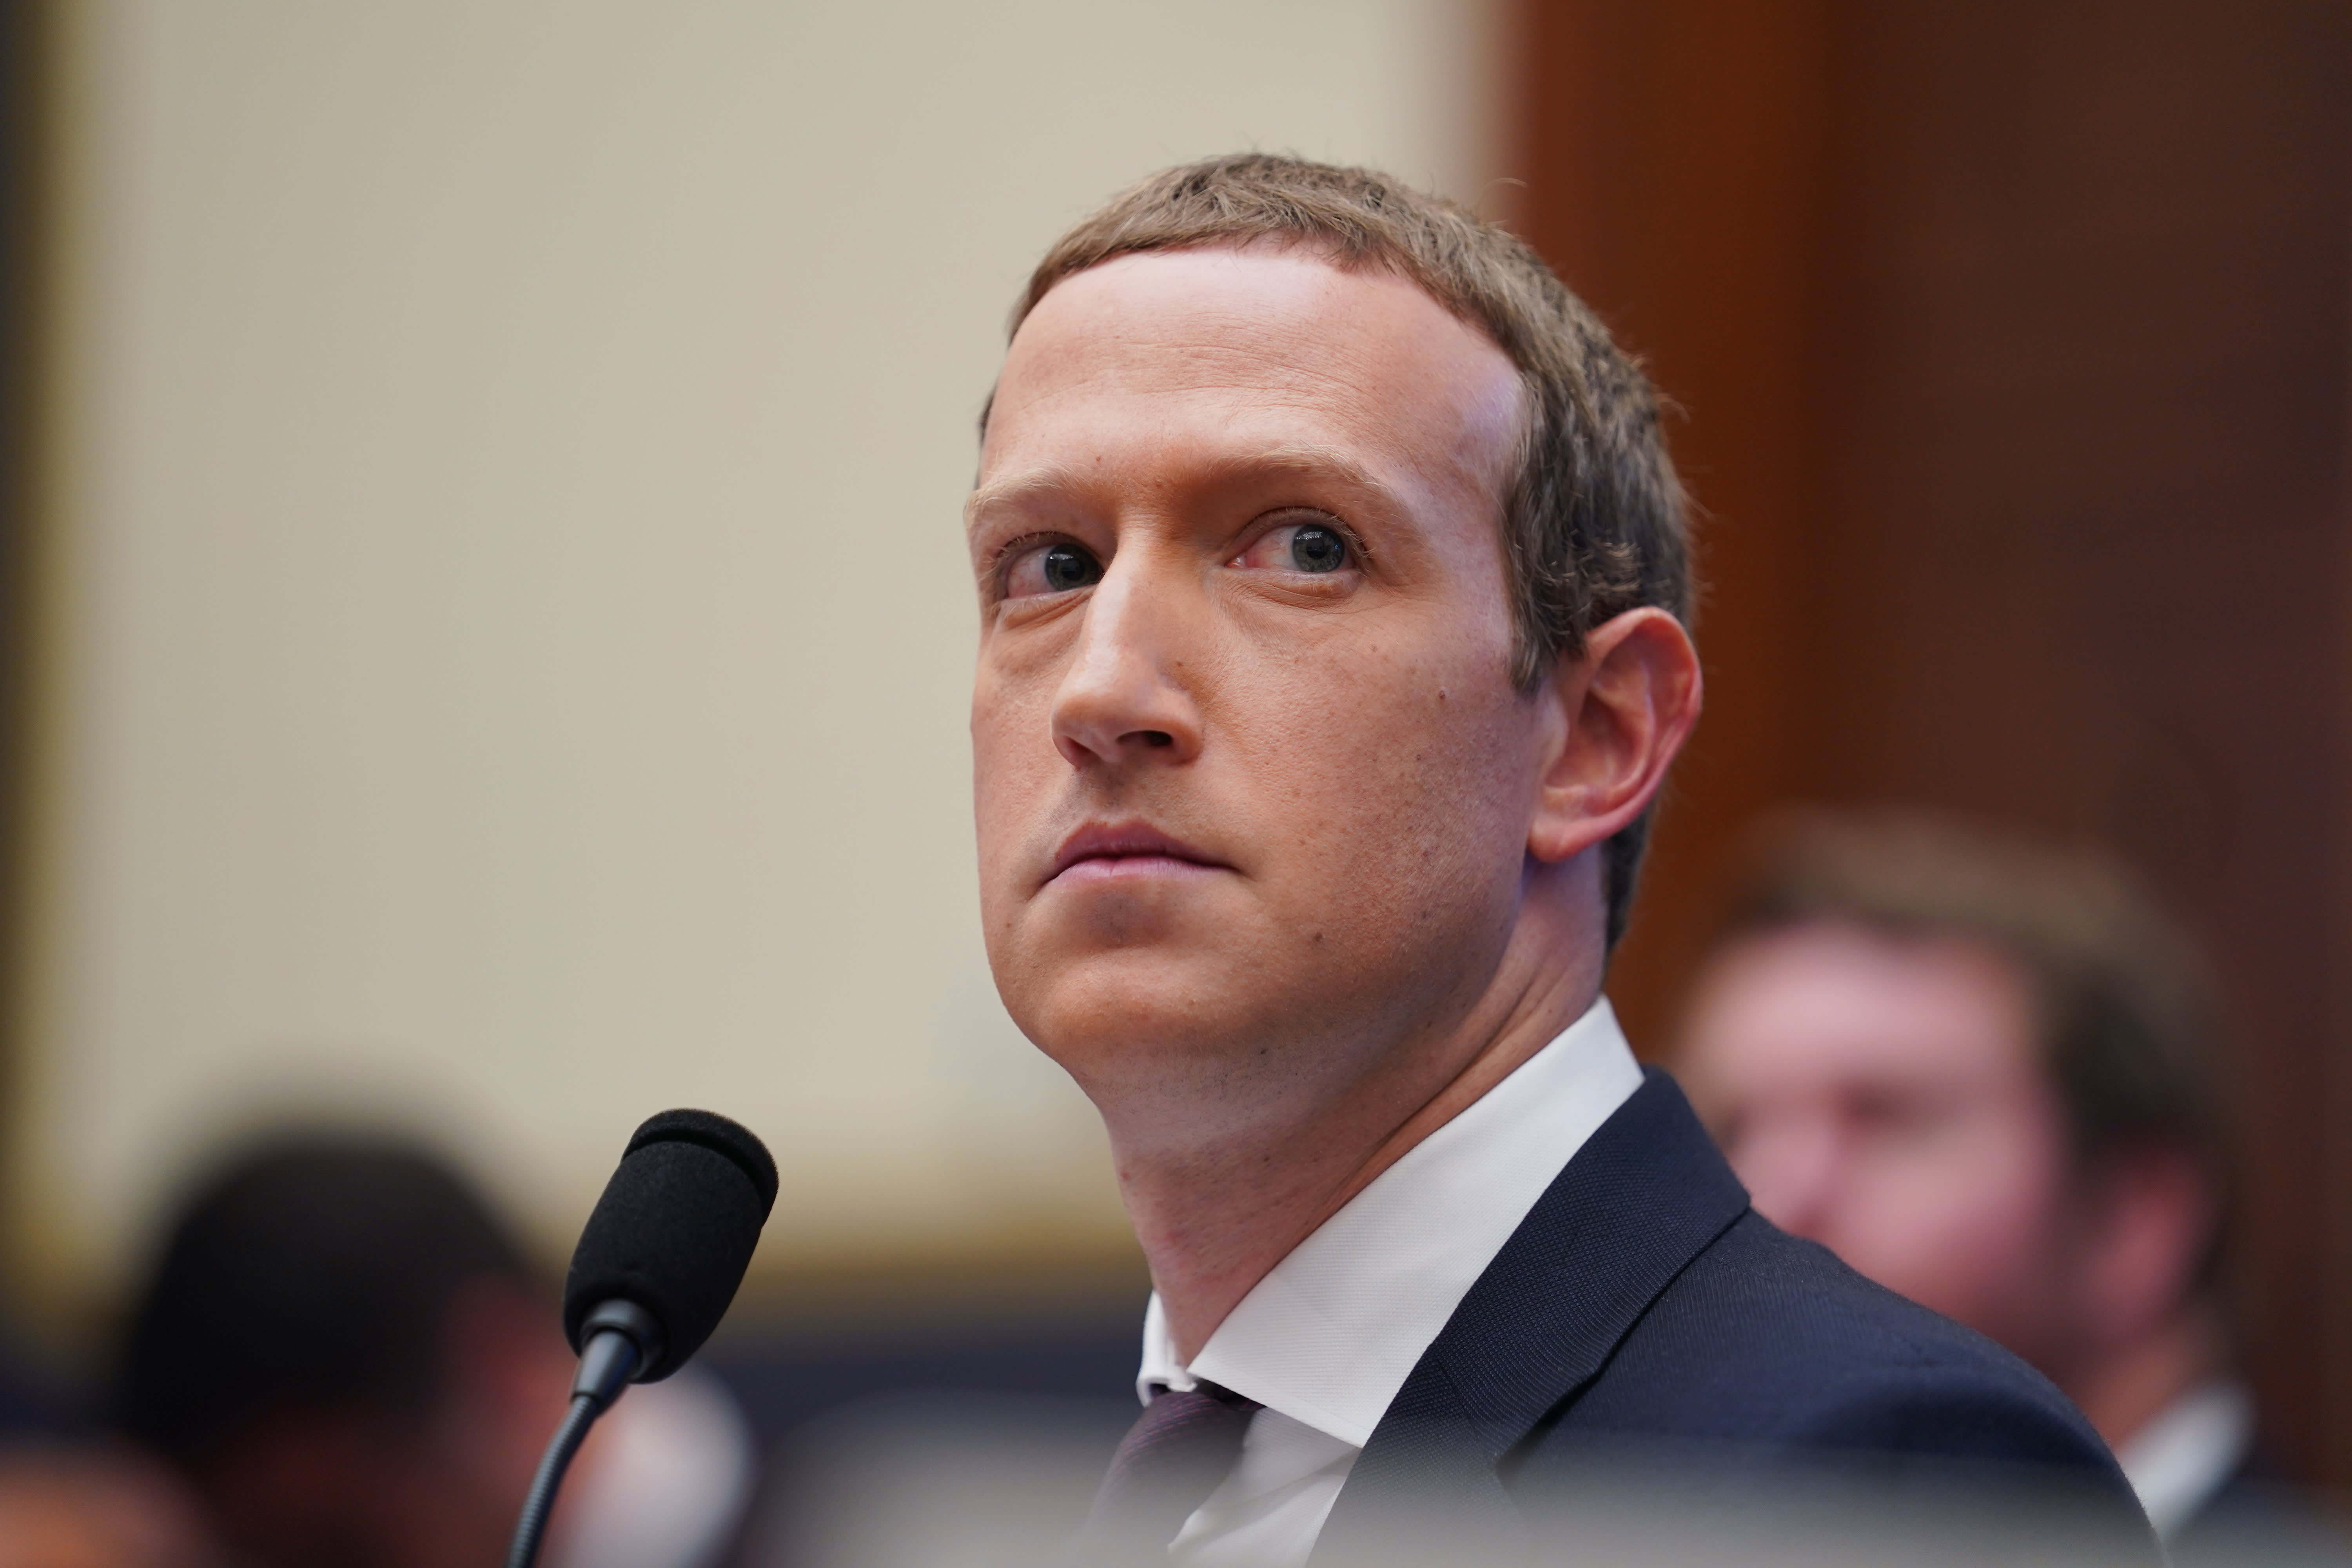 Facebook CEO Mark Zuckerberg testifies before the U.S. House Financial Services Committee during An Examination of Facebook and Its Impact on the Financial Services and Housing Sectors hearing on Capitol Hill in Washington on Oct. 23, 2019.